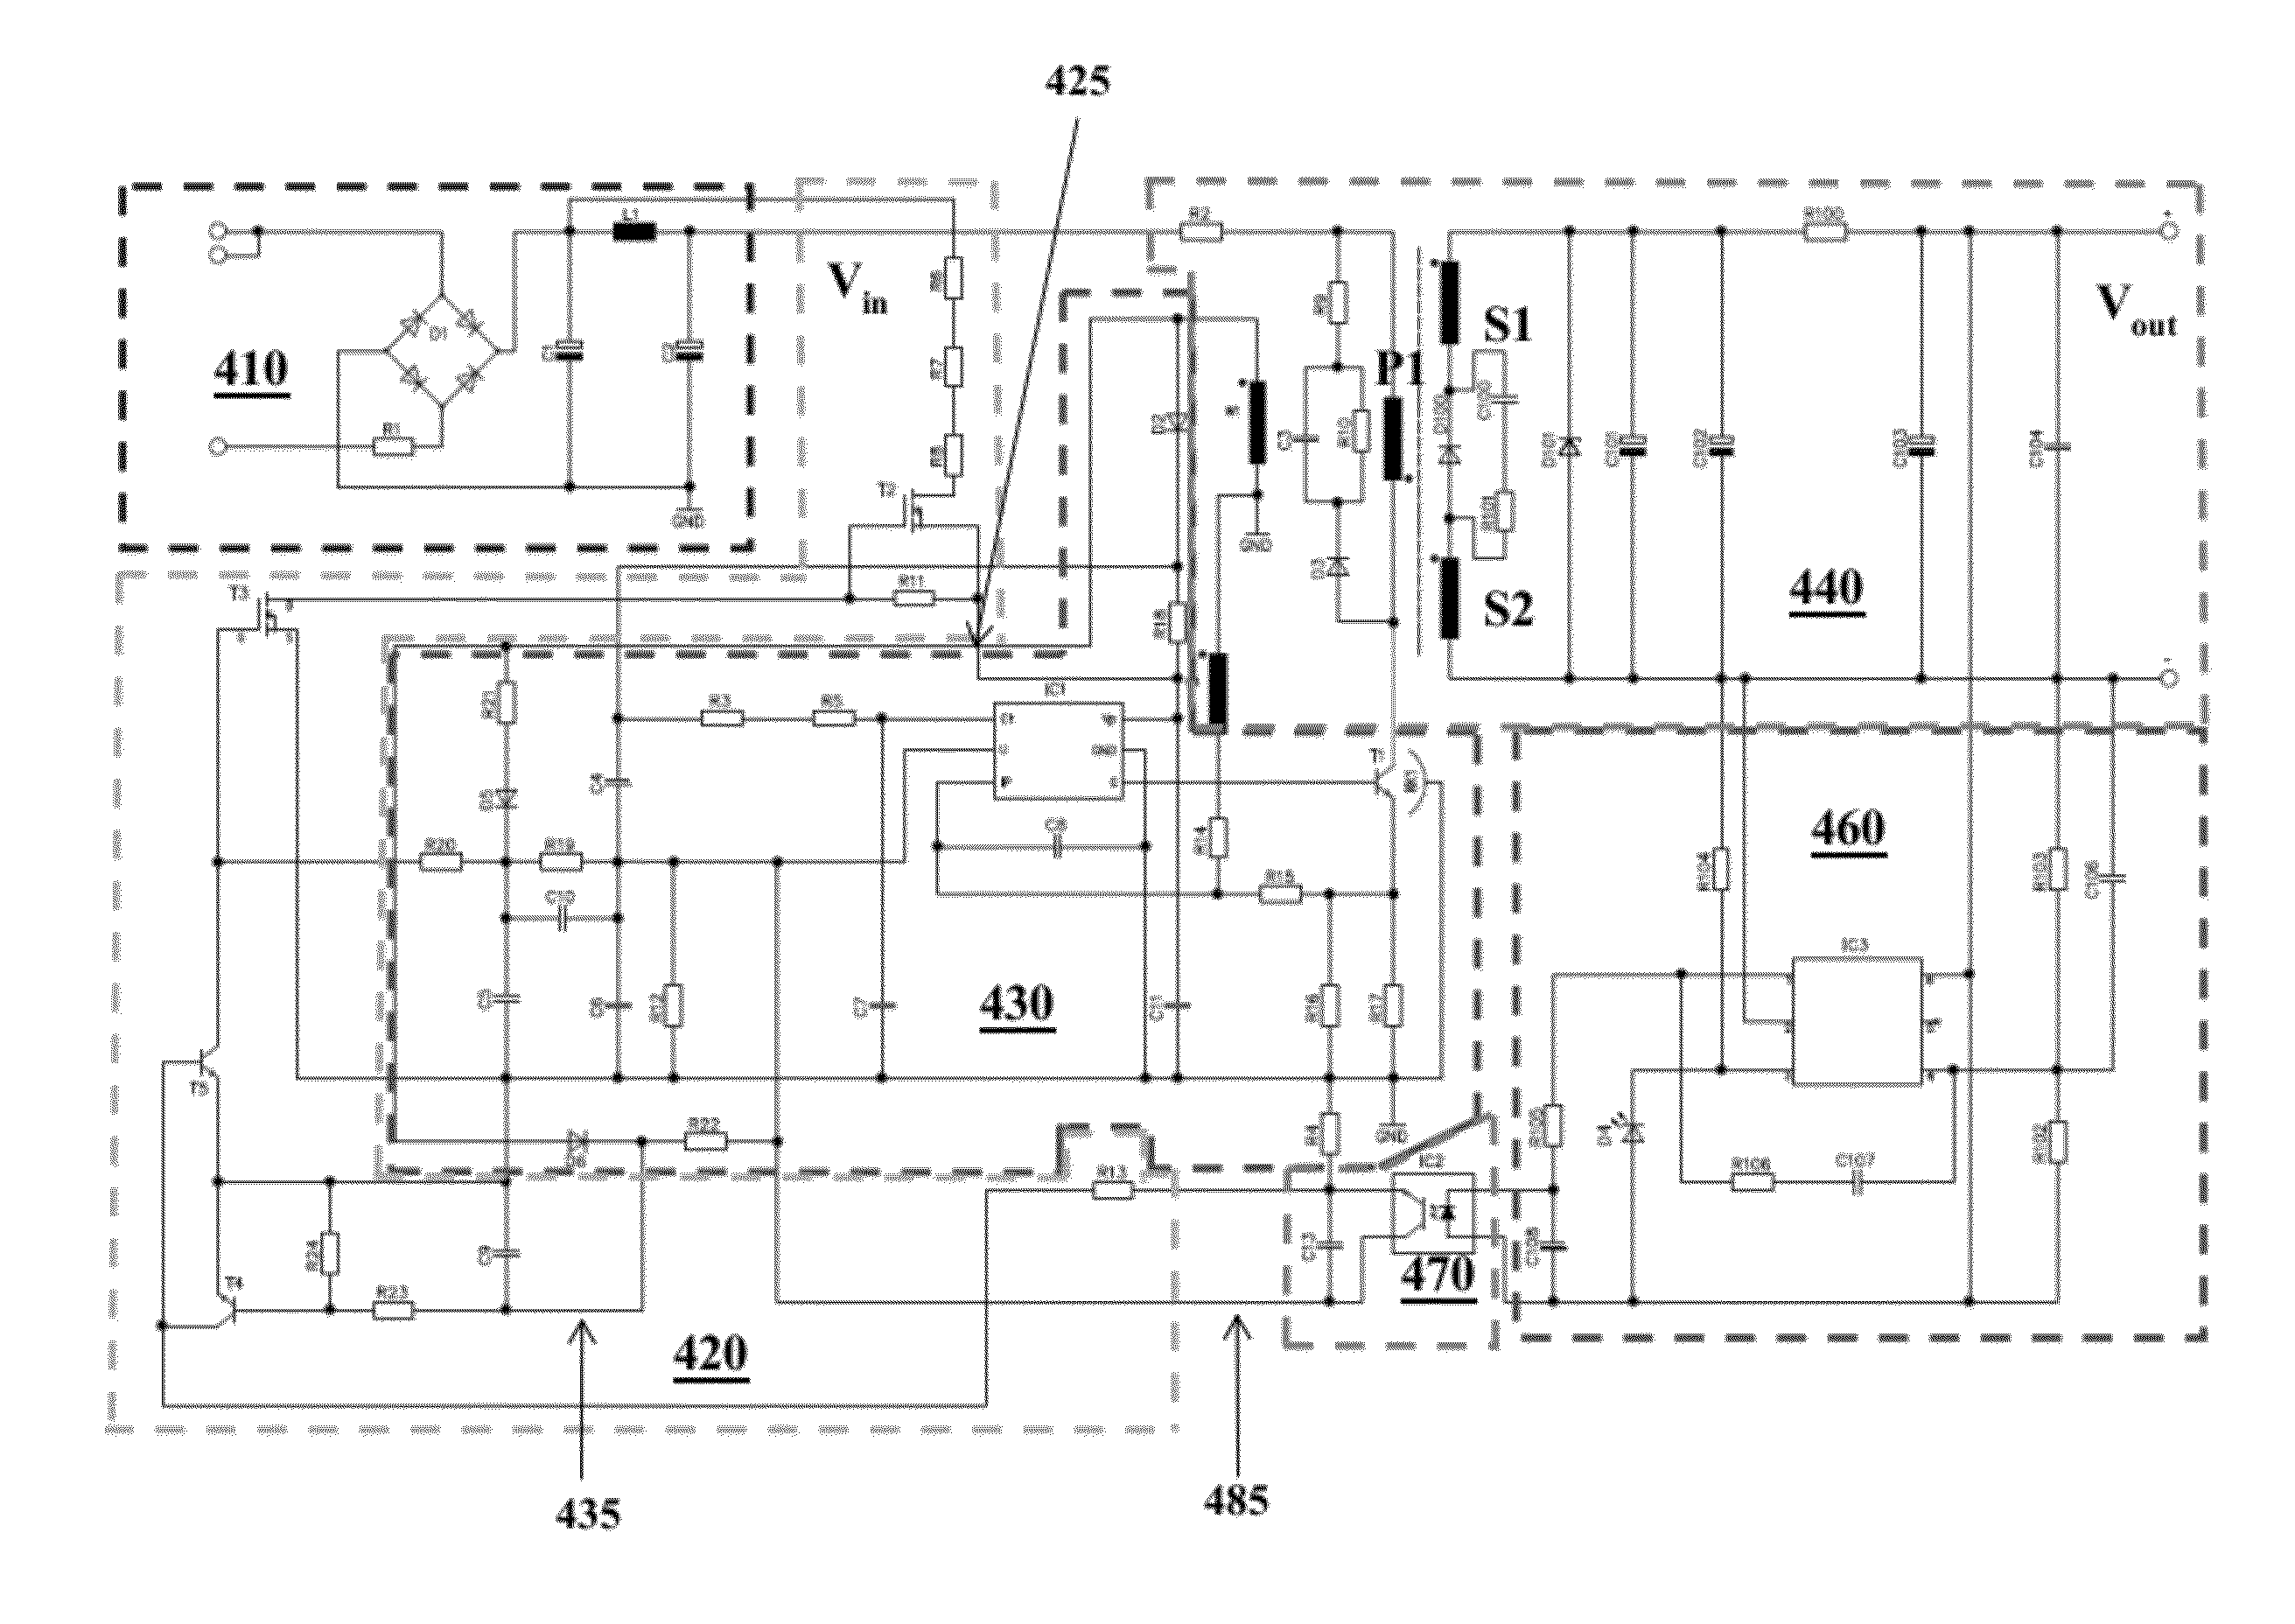 Power converter with reduced power dissipation